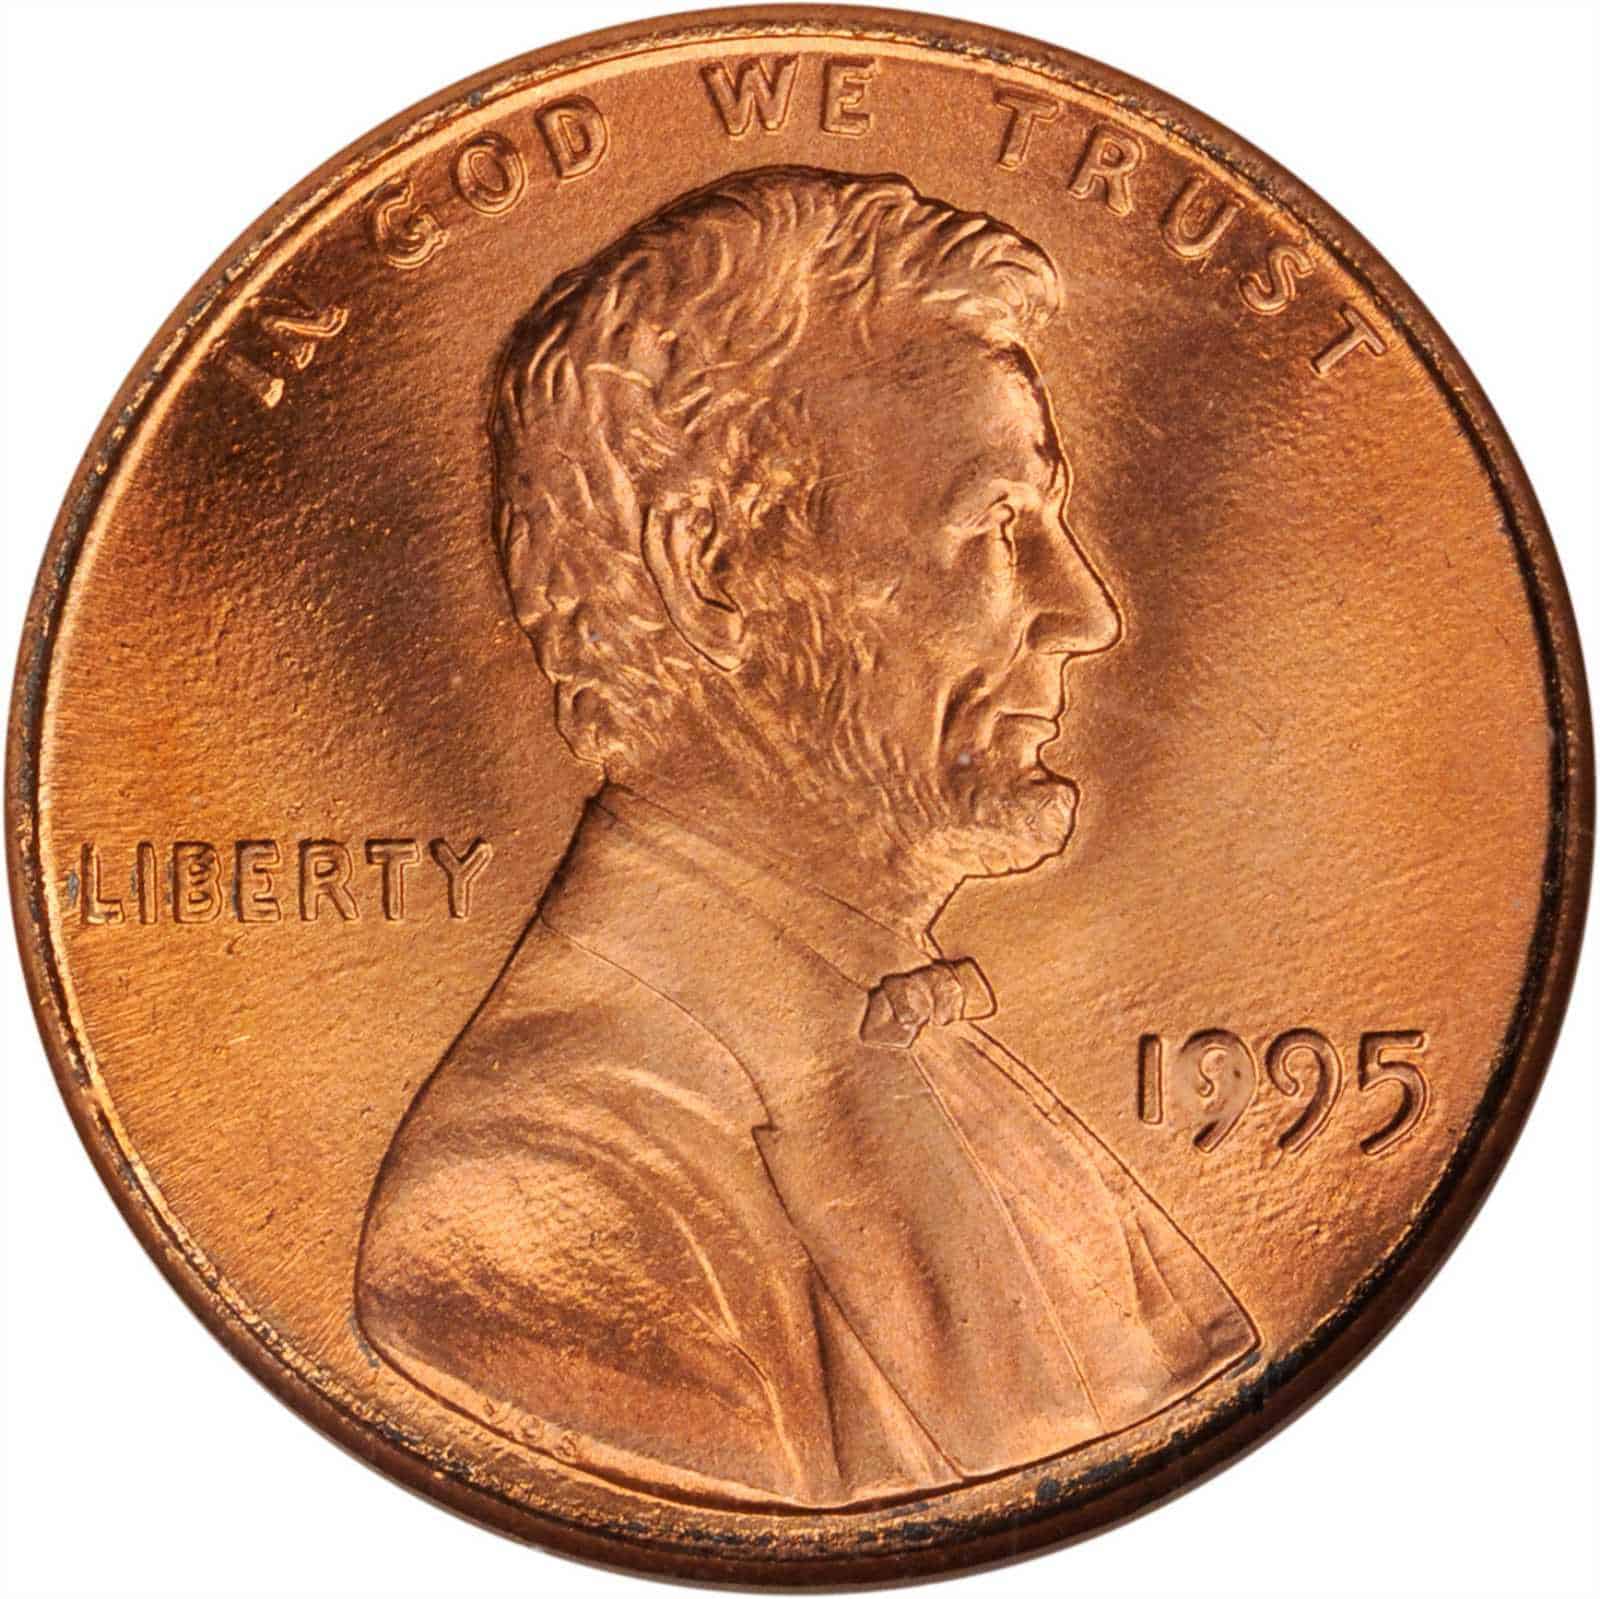 The Obverse of the 1995 Penny